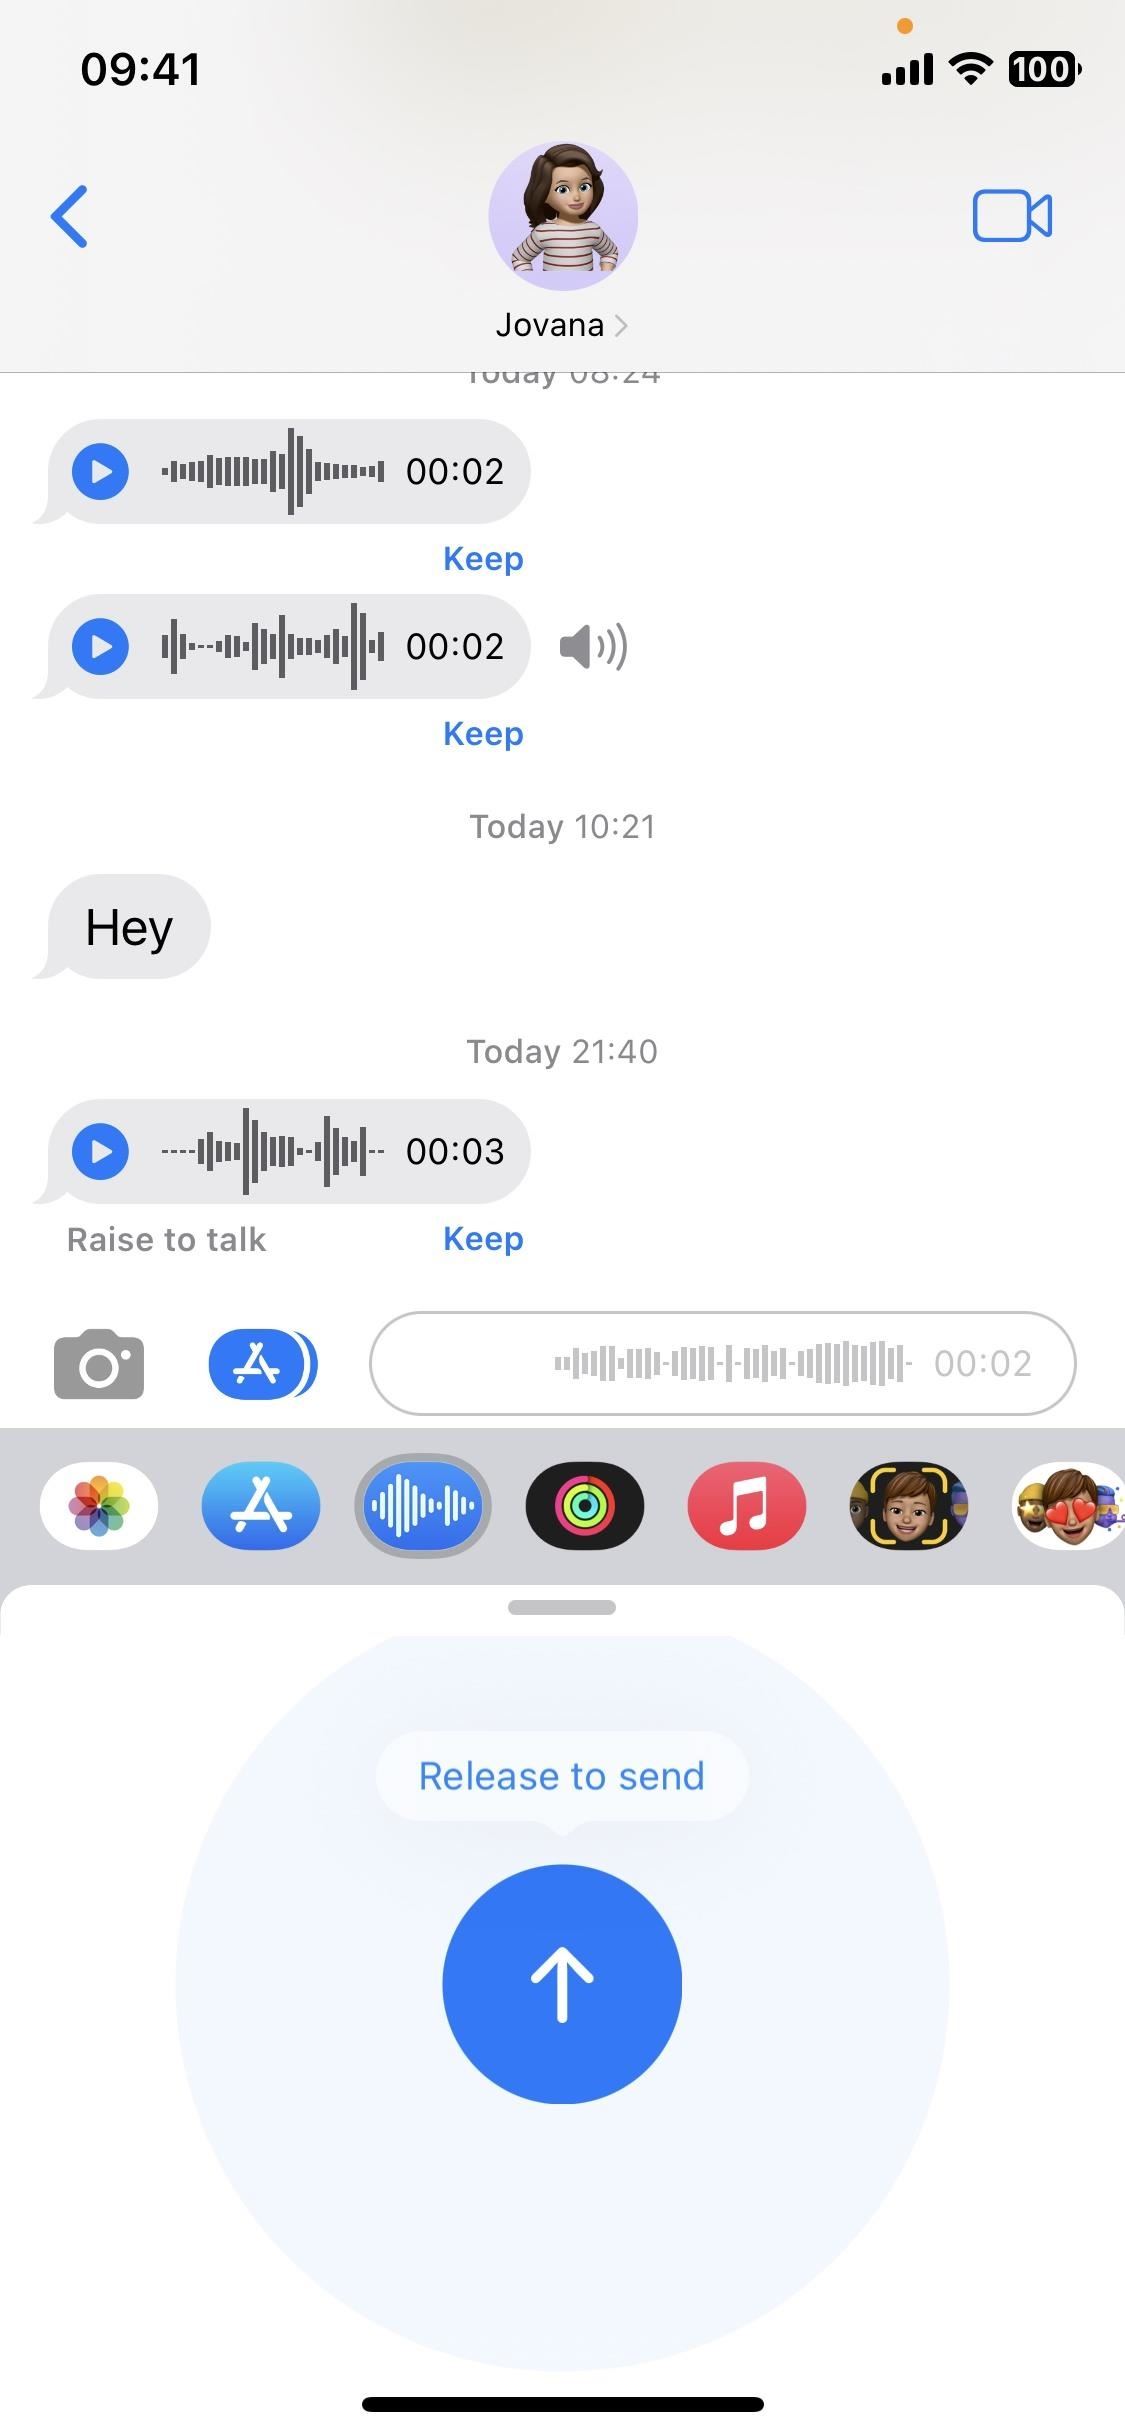 iOS 16 Changes How You Record and Send Audio Messages on Your iPhone — Here's How It Works Now